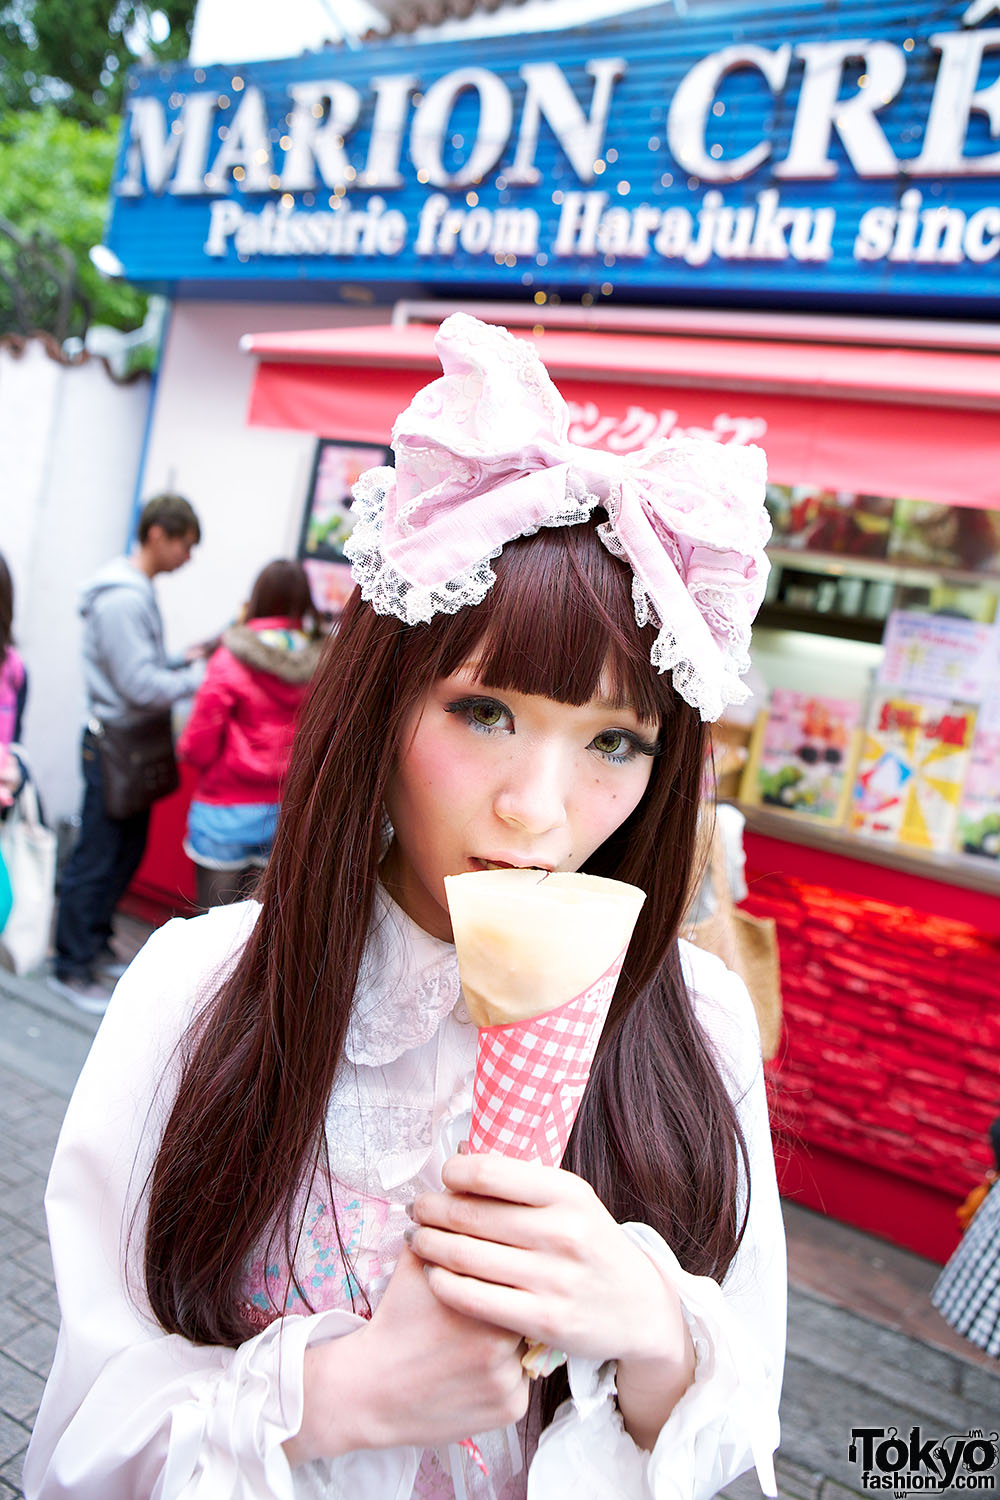 Harajuku Lolita Experience by Maison de Julietta in Video & Pictures